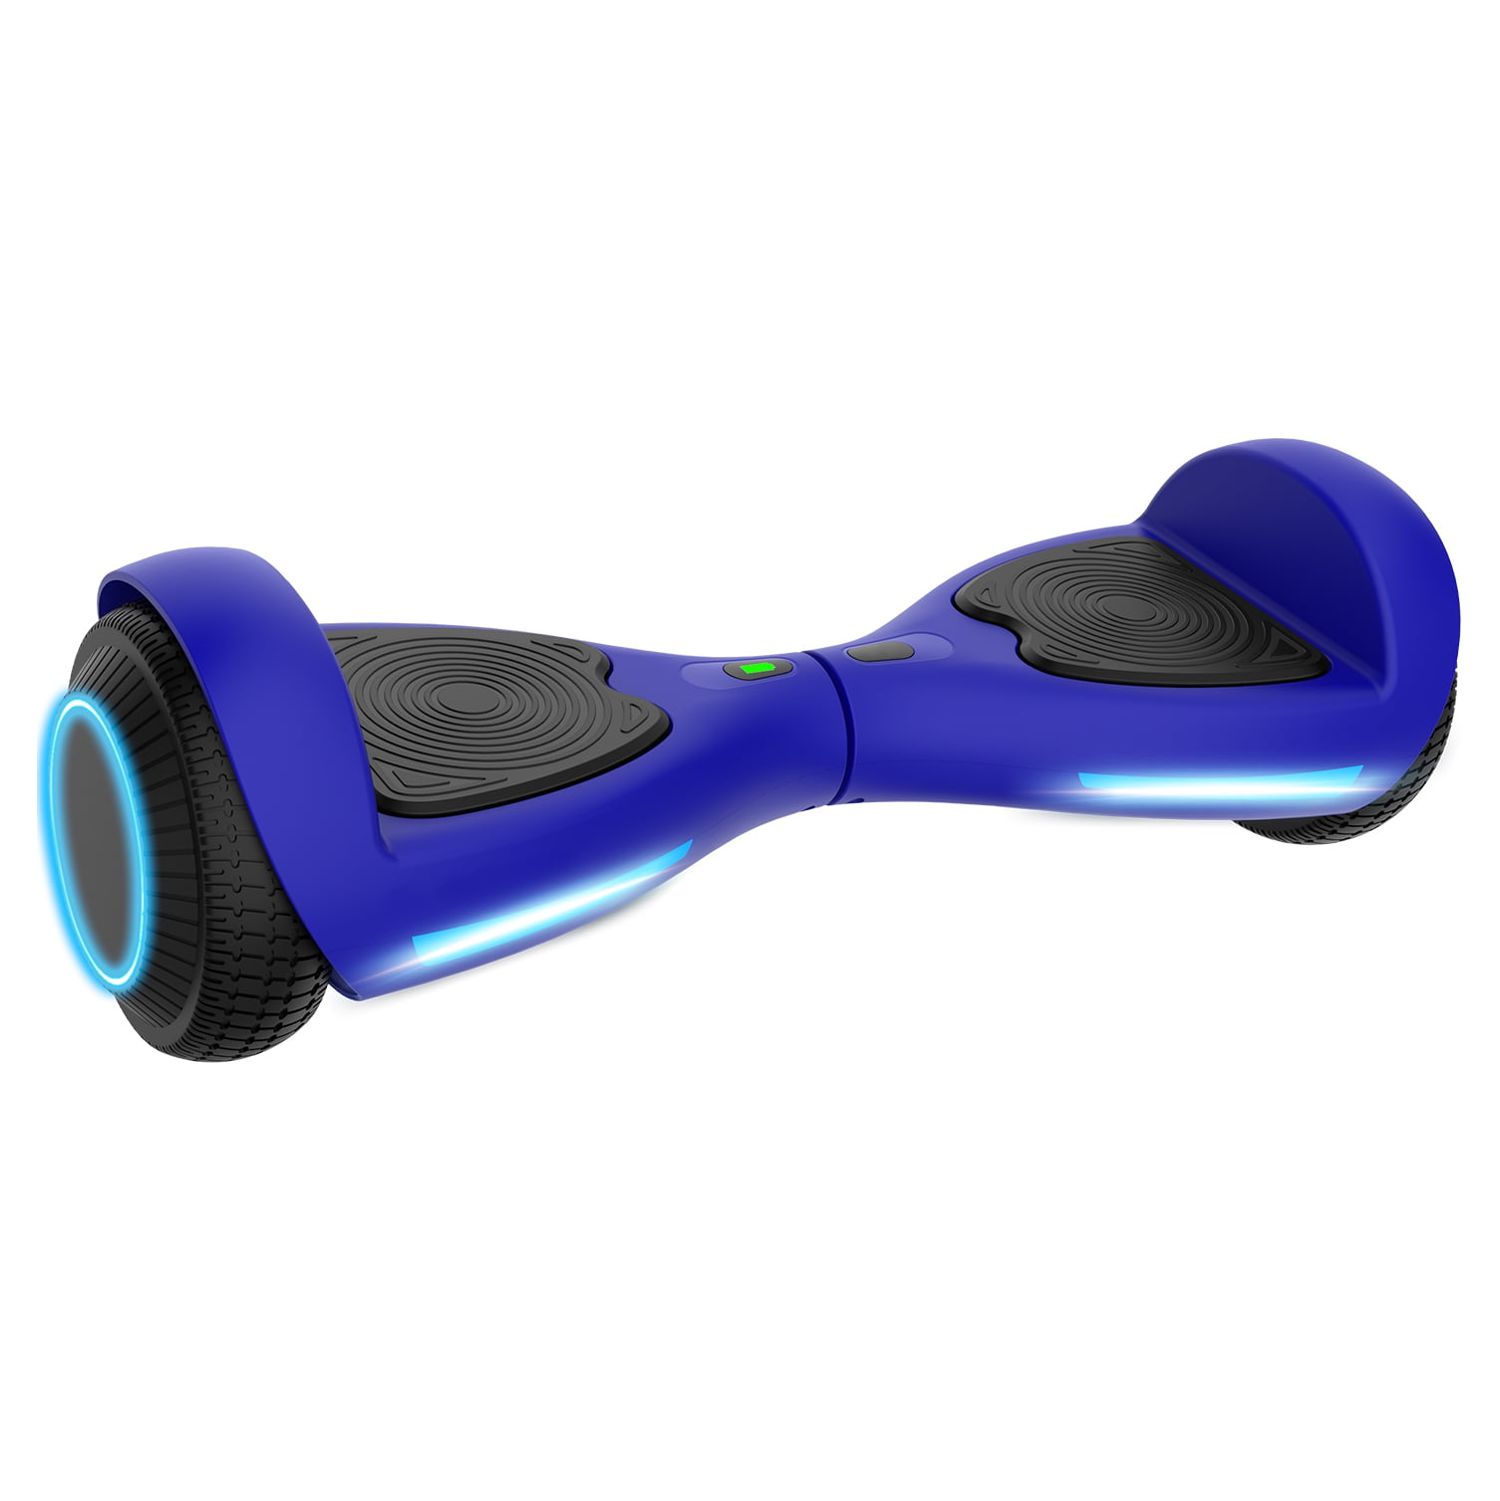 GOTRAX FX3 Hoverboard for Kids Adults,200W Motor 6.5" LED Wheels 6.2mph Speed Hover Board, Blue - image 11 of 12